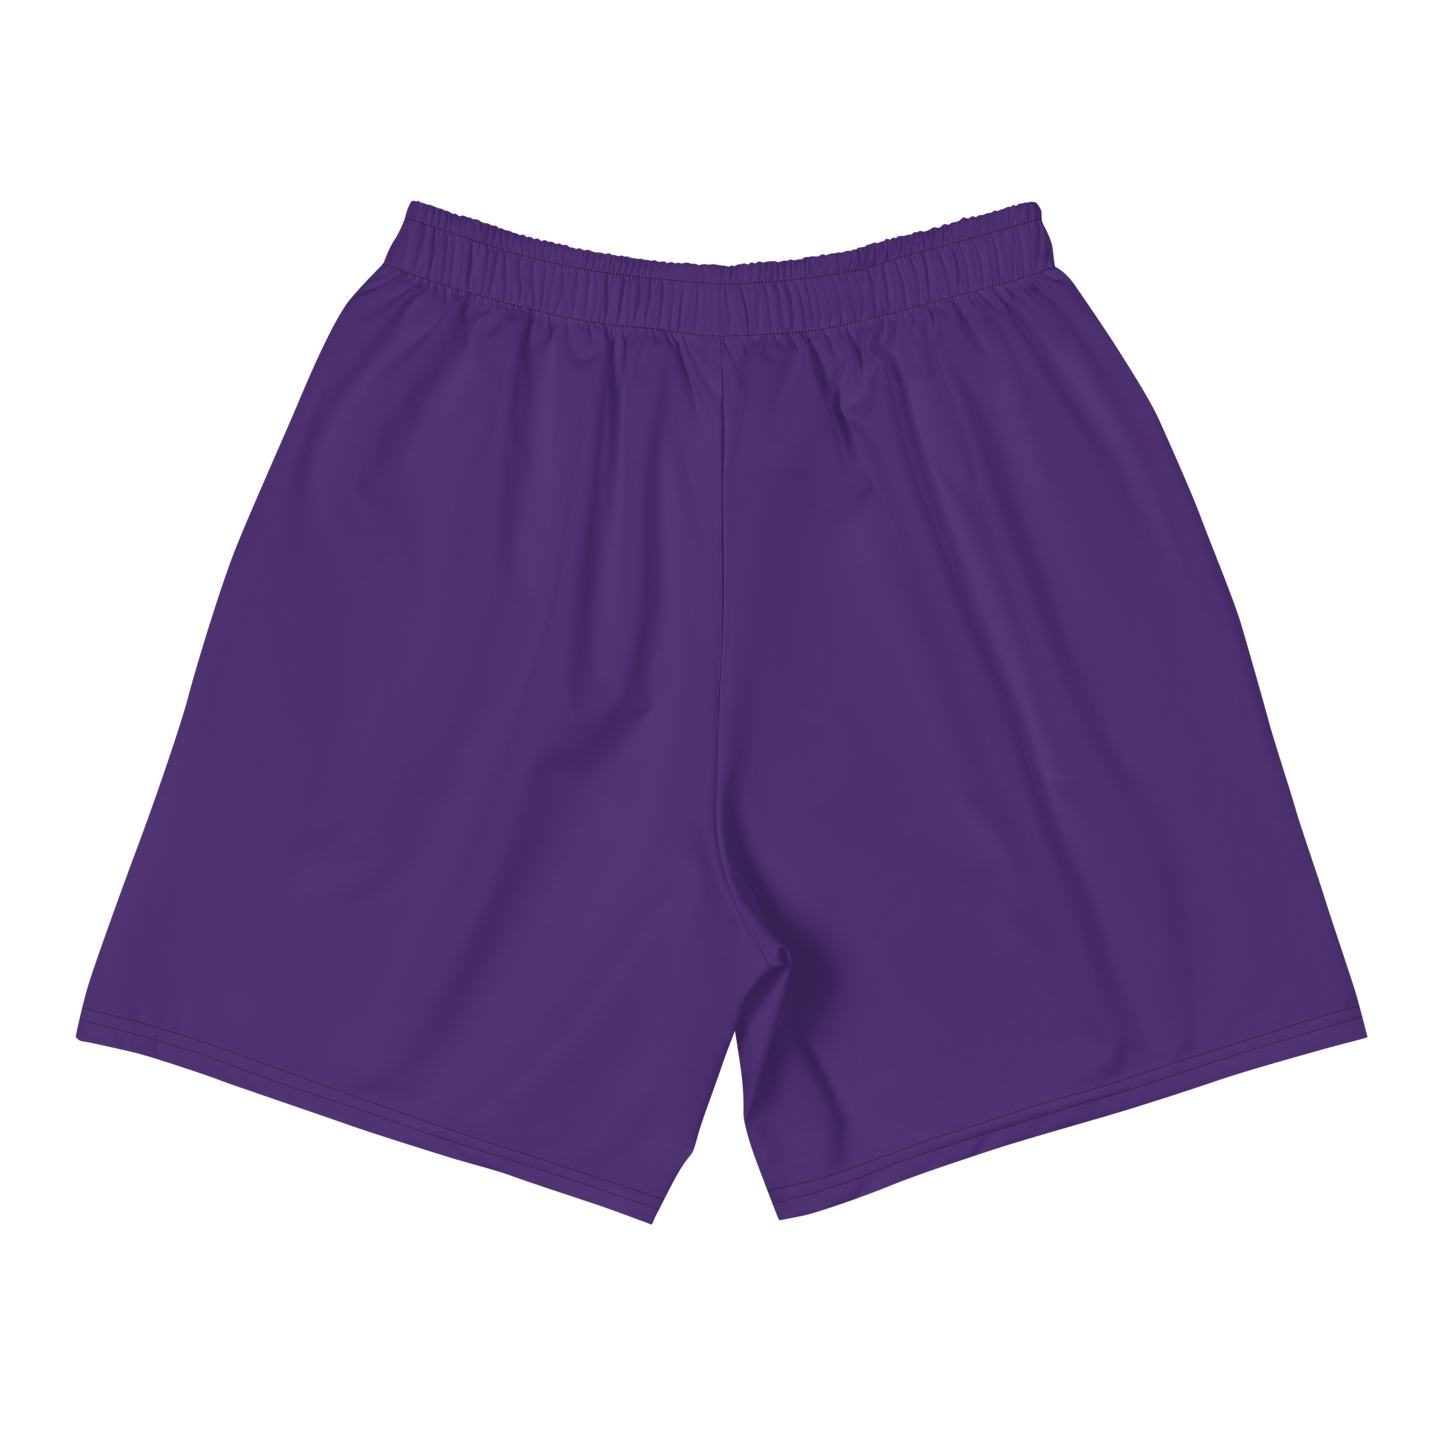 WILL LEE ATHLETIC SHORTS